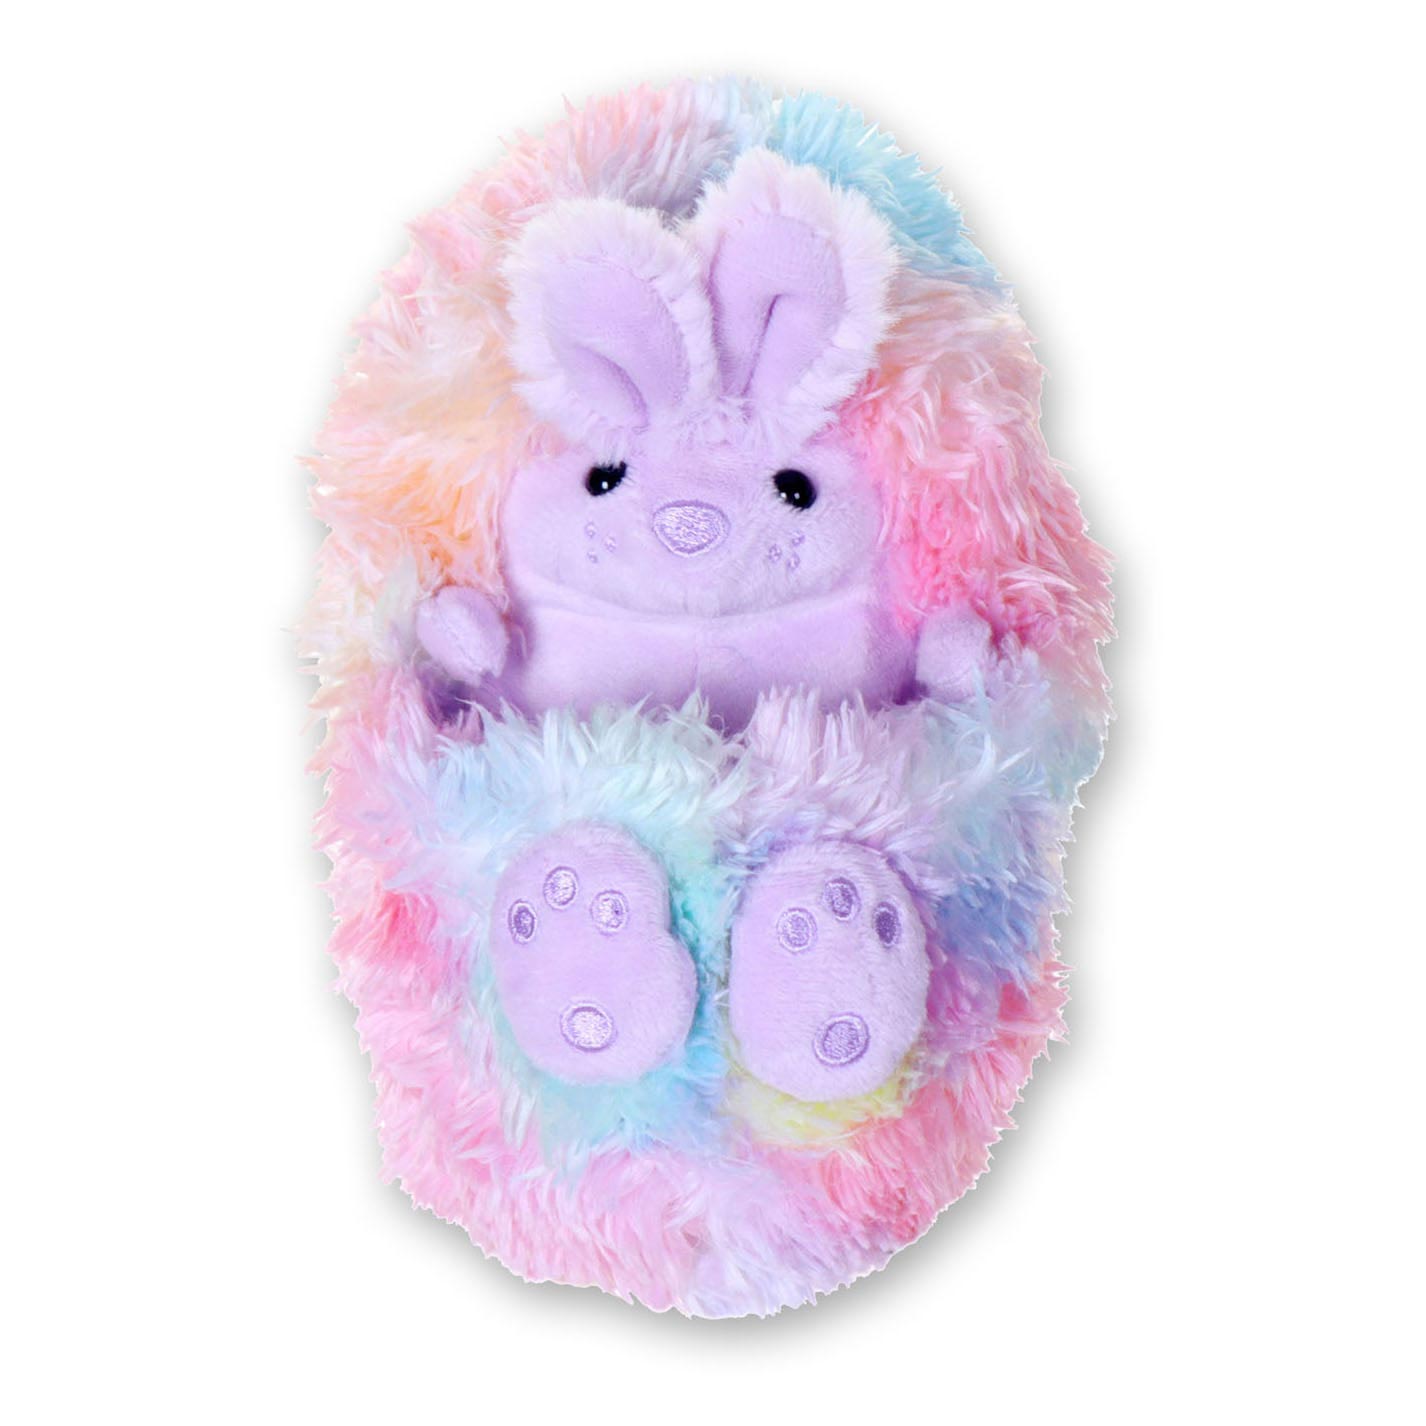 aan de andere kant, Continentaal duim Curlimals Bo The Rainbow Bunny Interactive Plush Toy | Thimble Toys